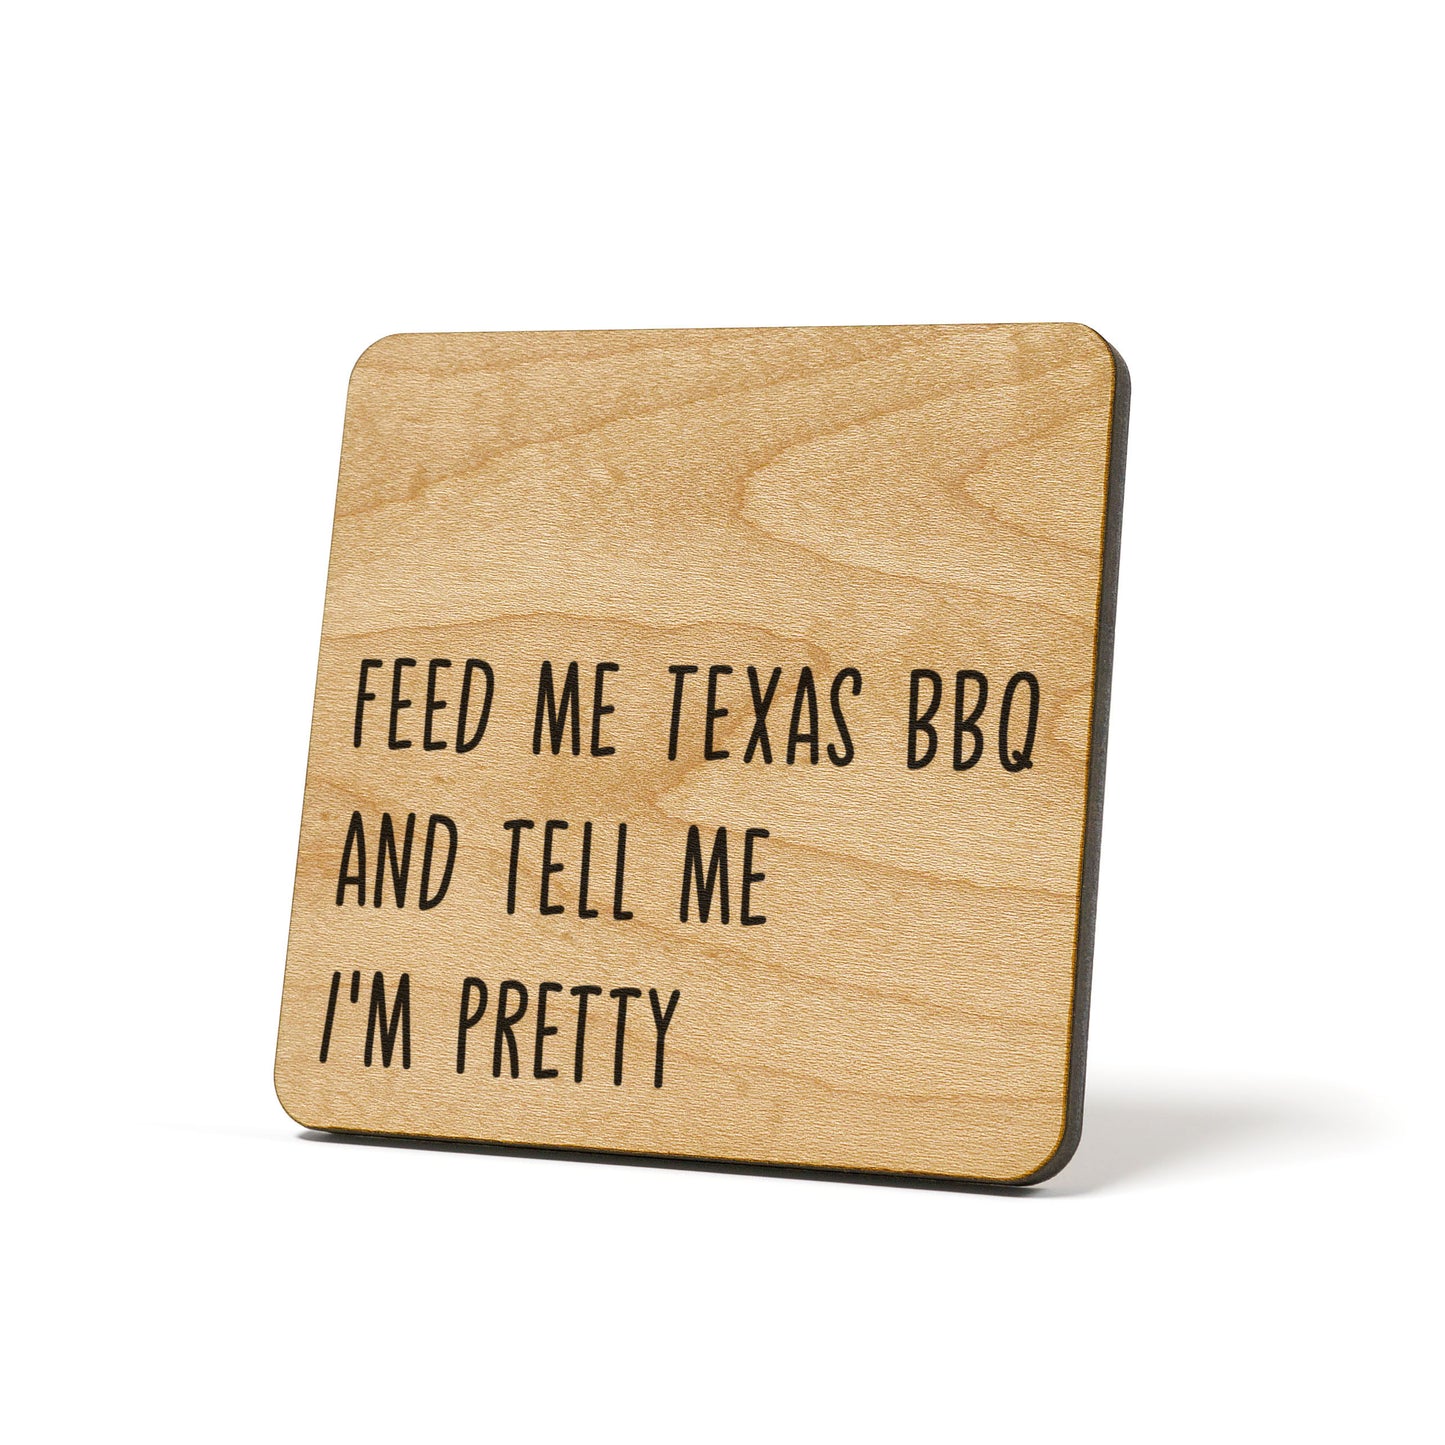 Feed Me Texas BBQ And Tell Me I'm Pretty Quote Coaster